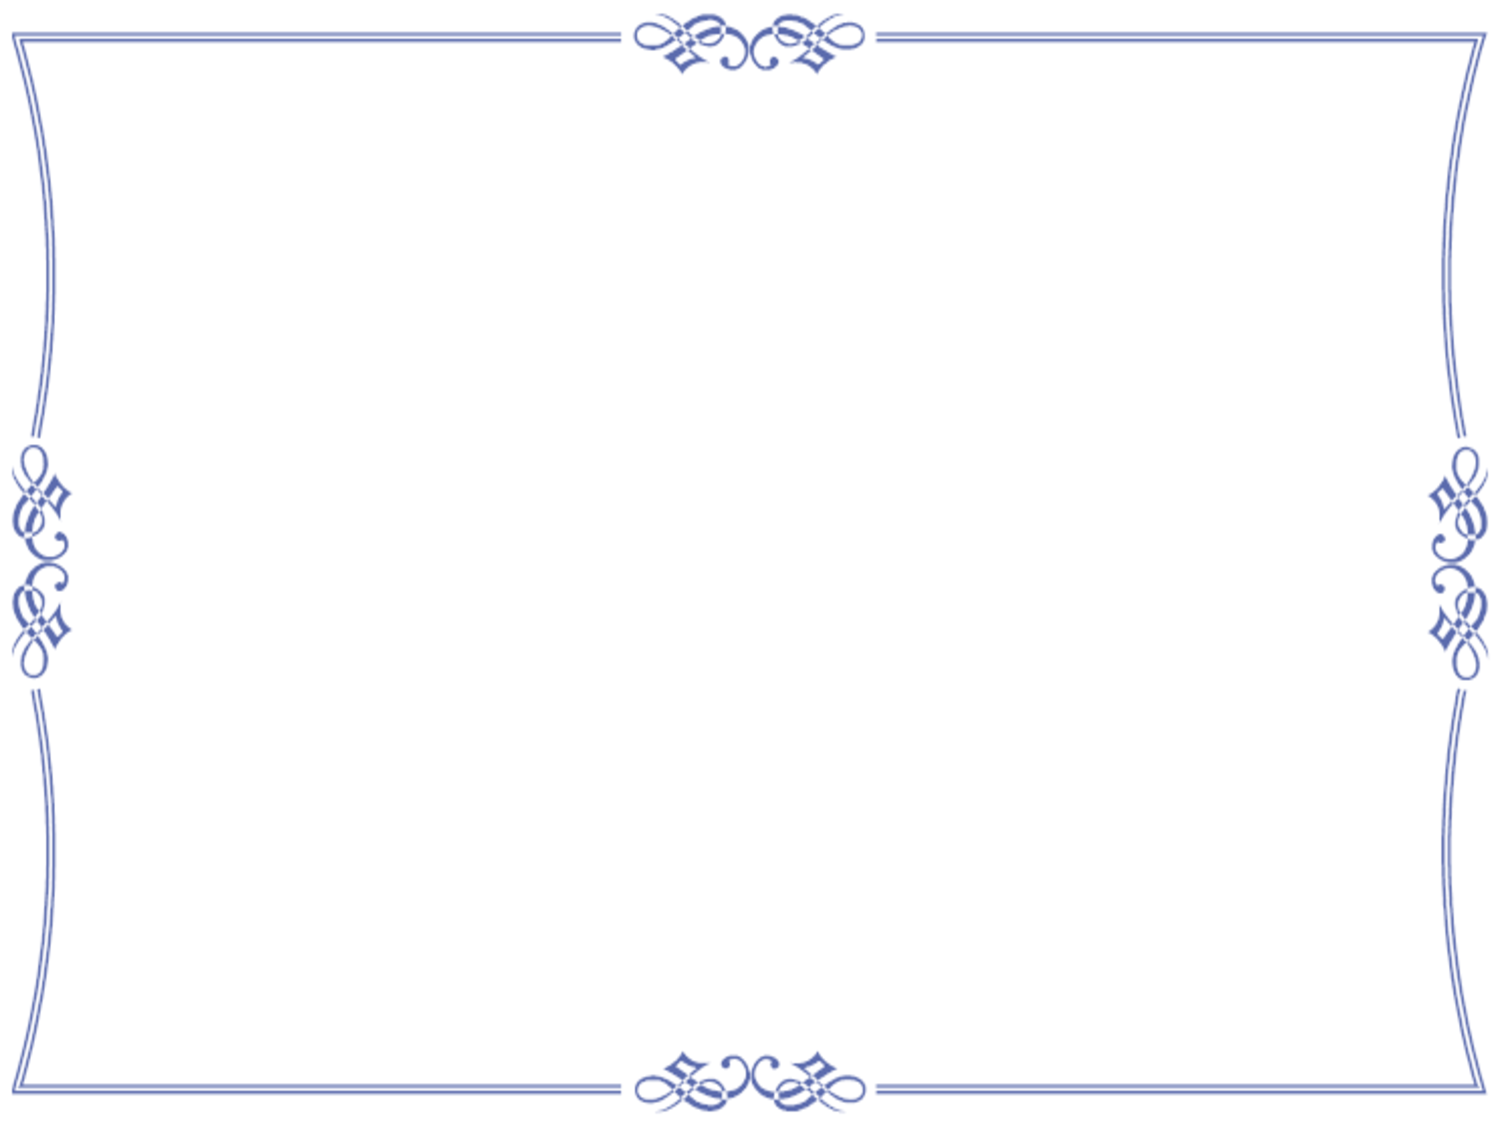 clipart gift certificate border - photo #31